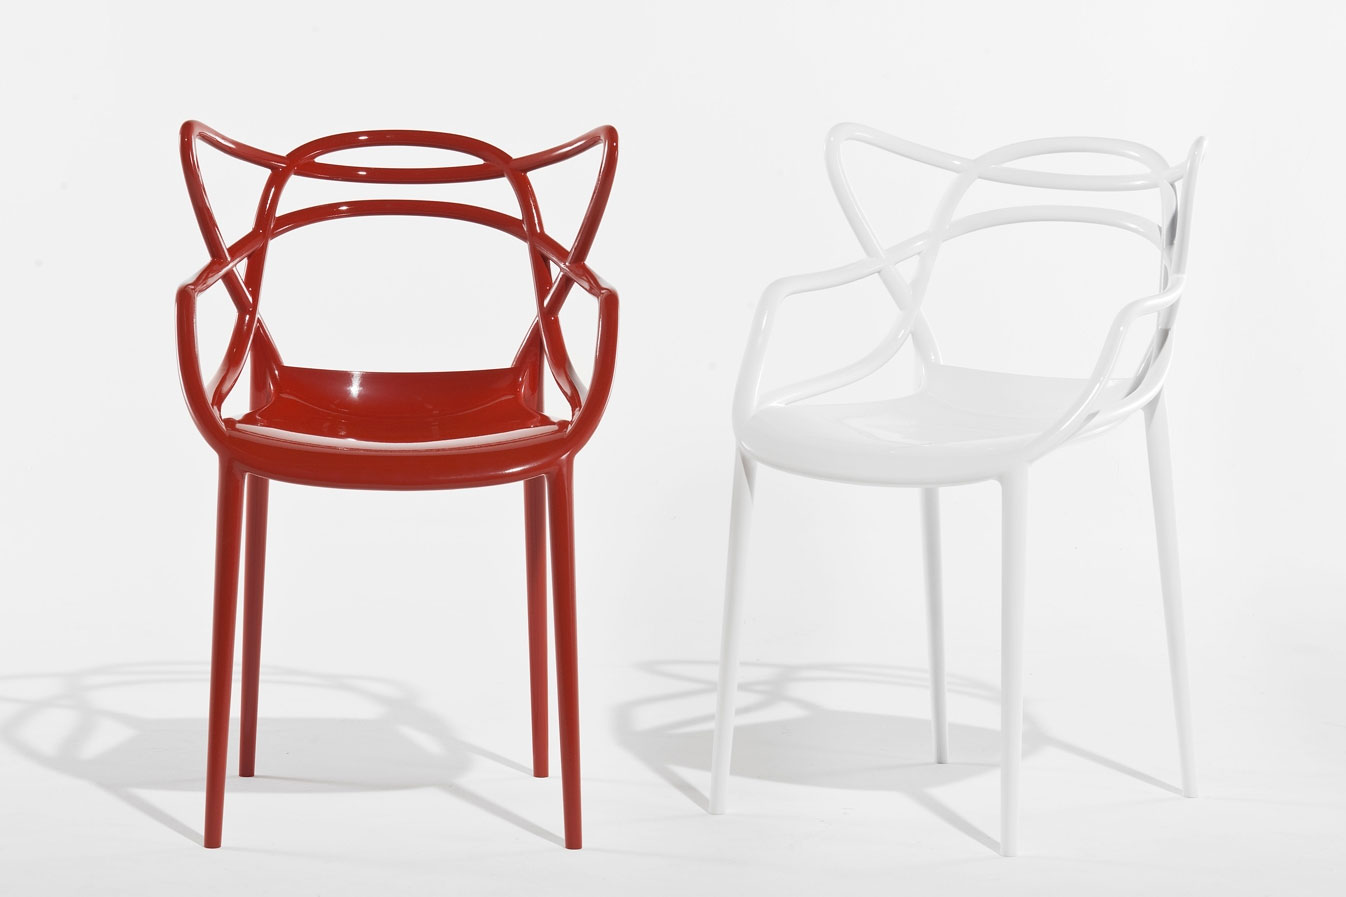 philippe starck: masters chair for kartell 